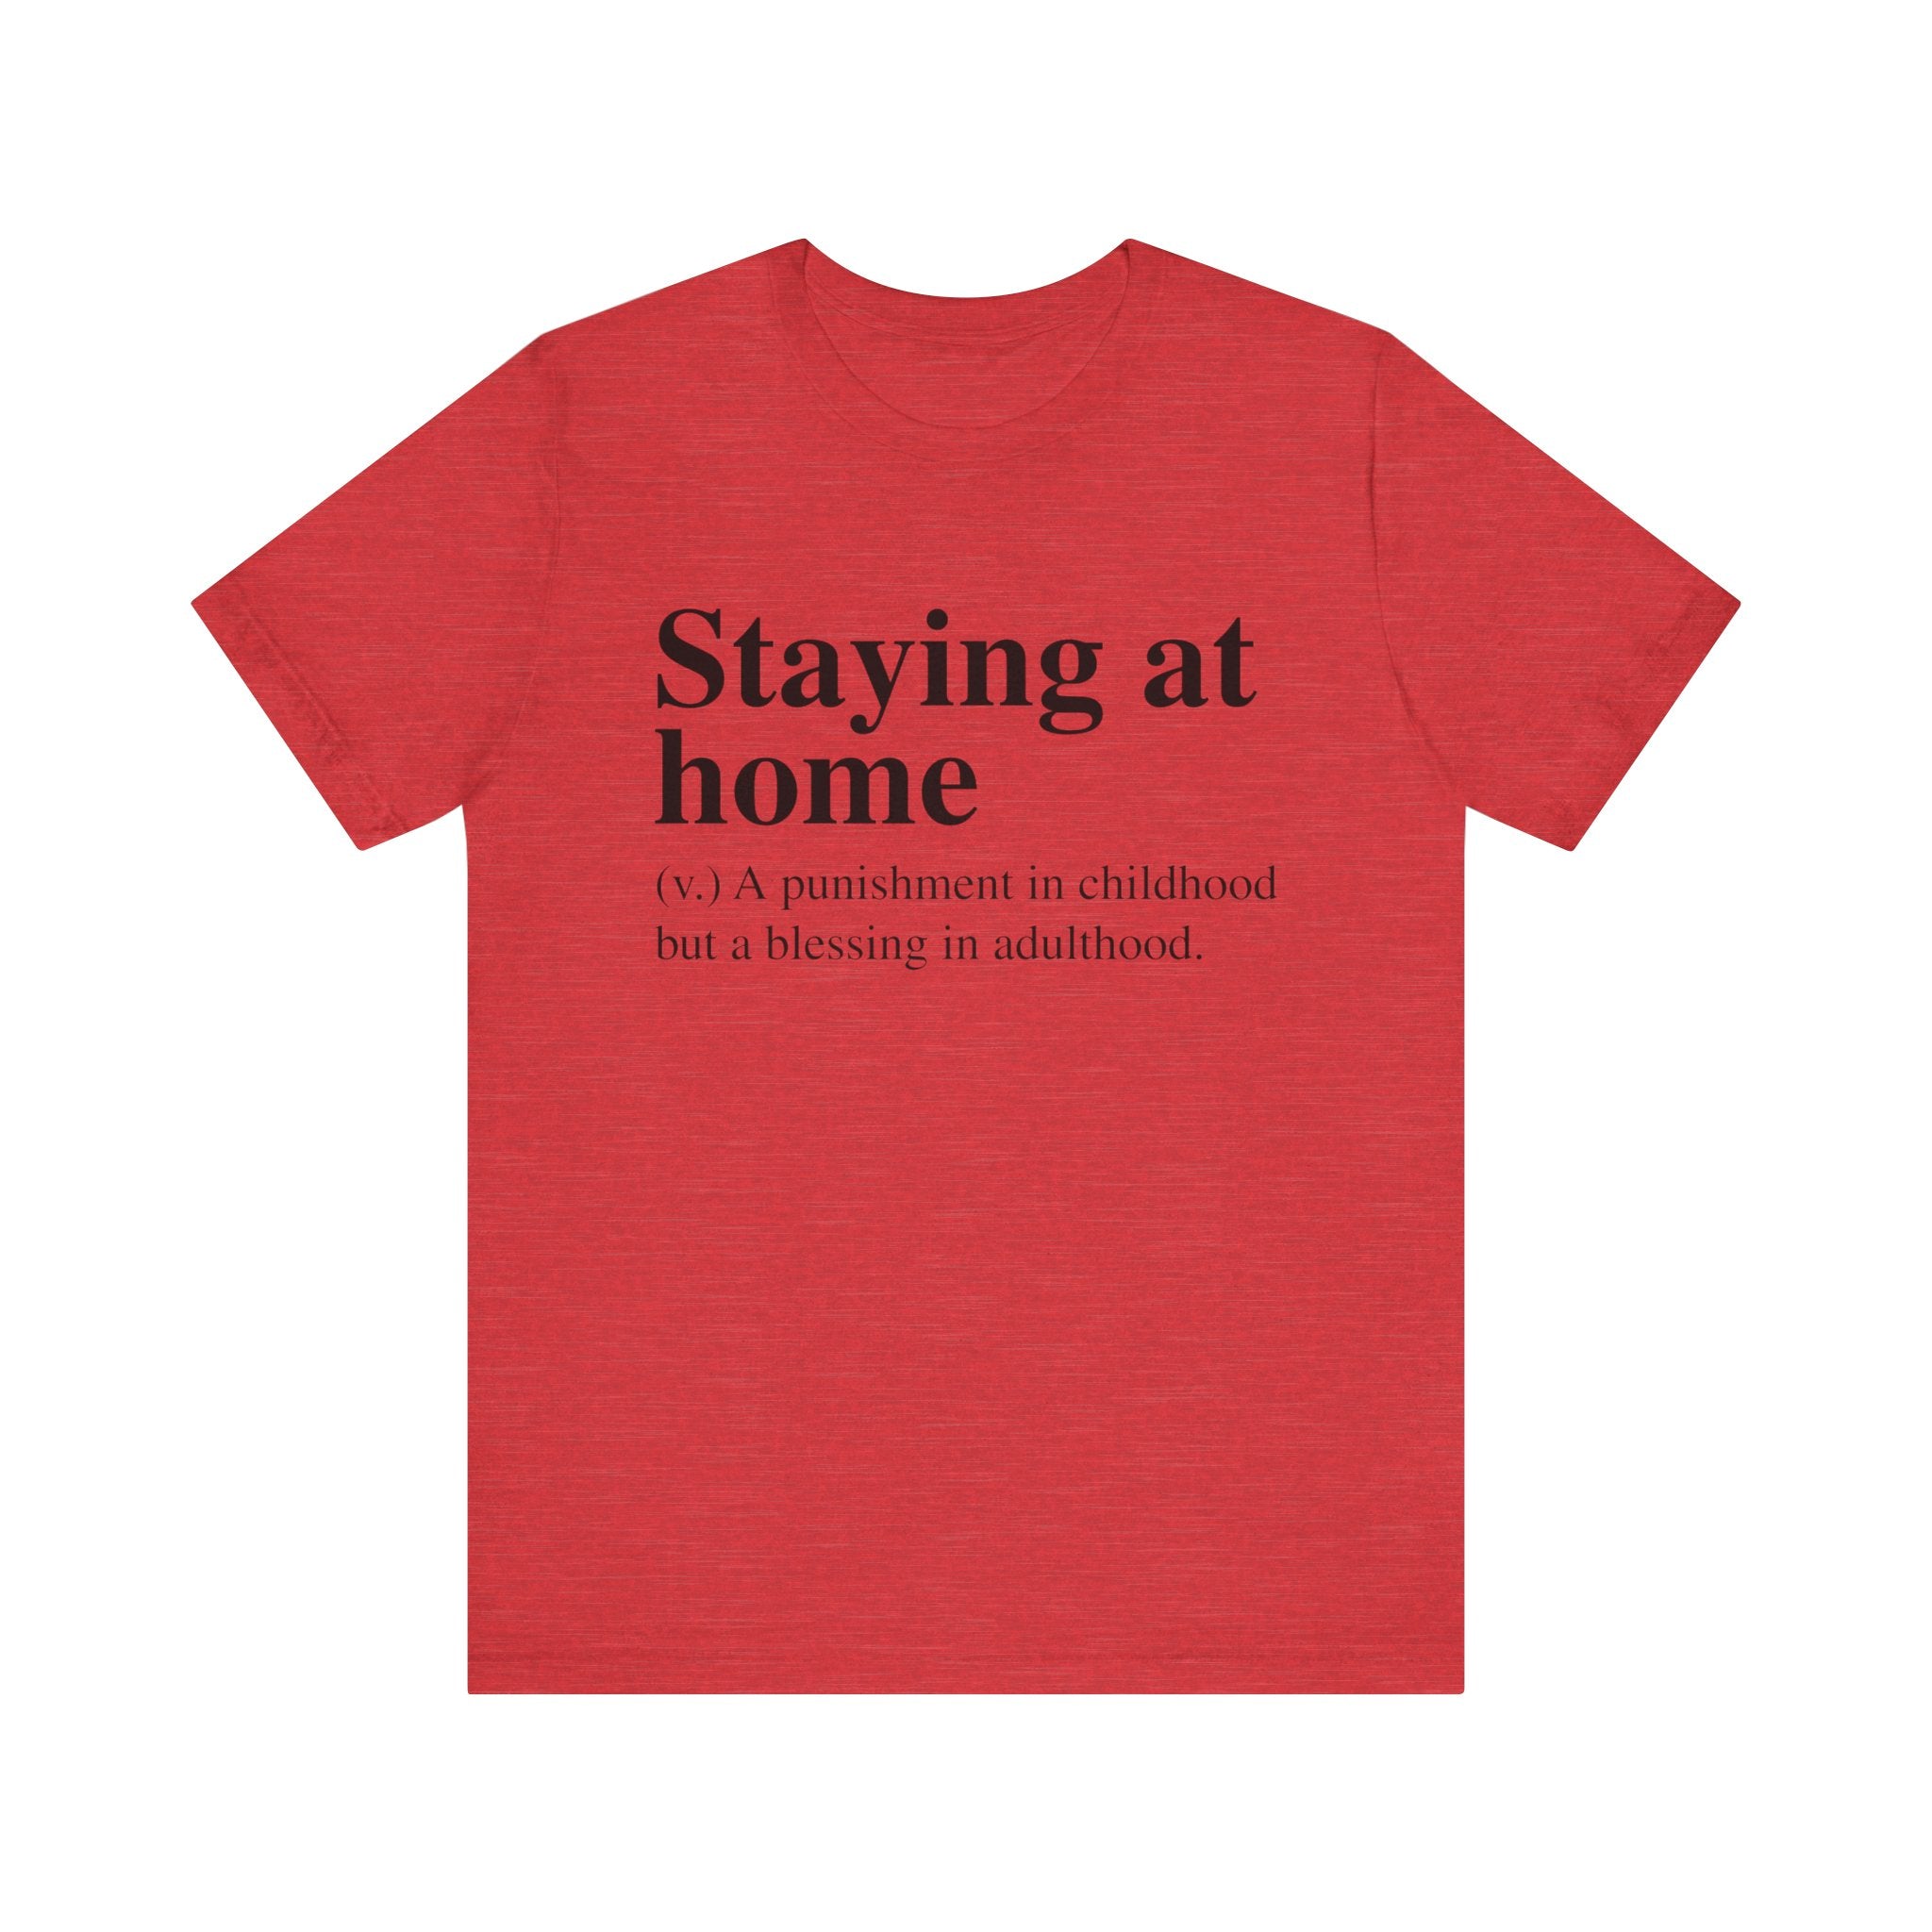 Unisex Staying at Home T-Shirt with text "staying at home" defined humorously as a childhood punishment but an adulthood blessing.